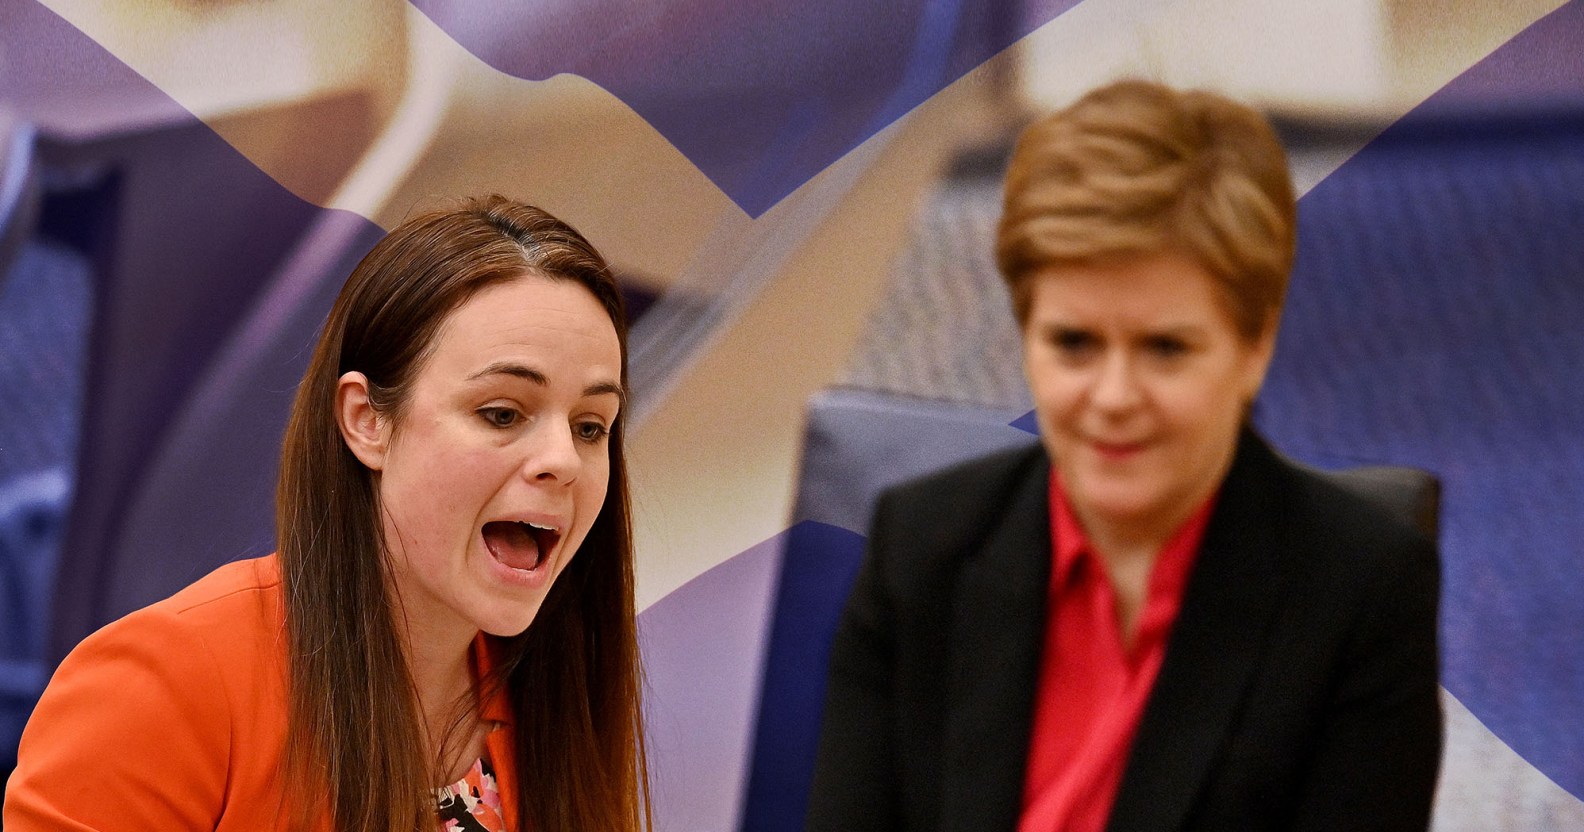 Kate Forbes pictured with Nicola Sturgeon in the background. The background of the image has been edited so the pair are pictured against a Scottish flag.